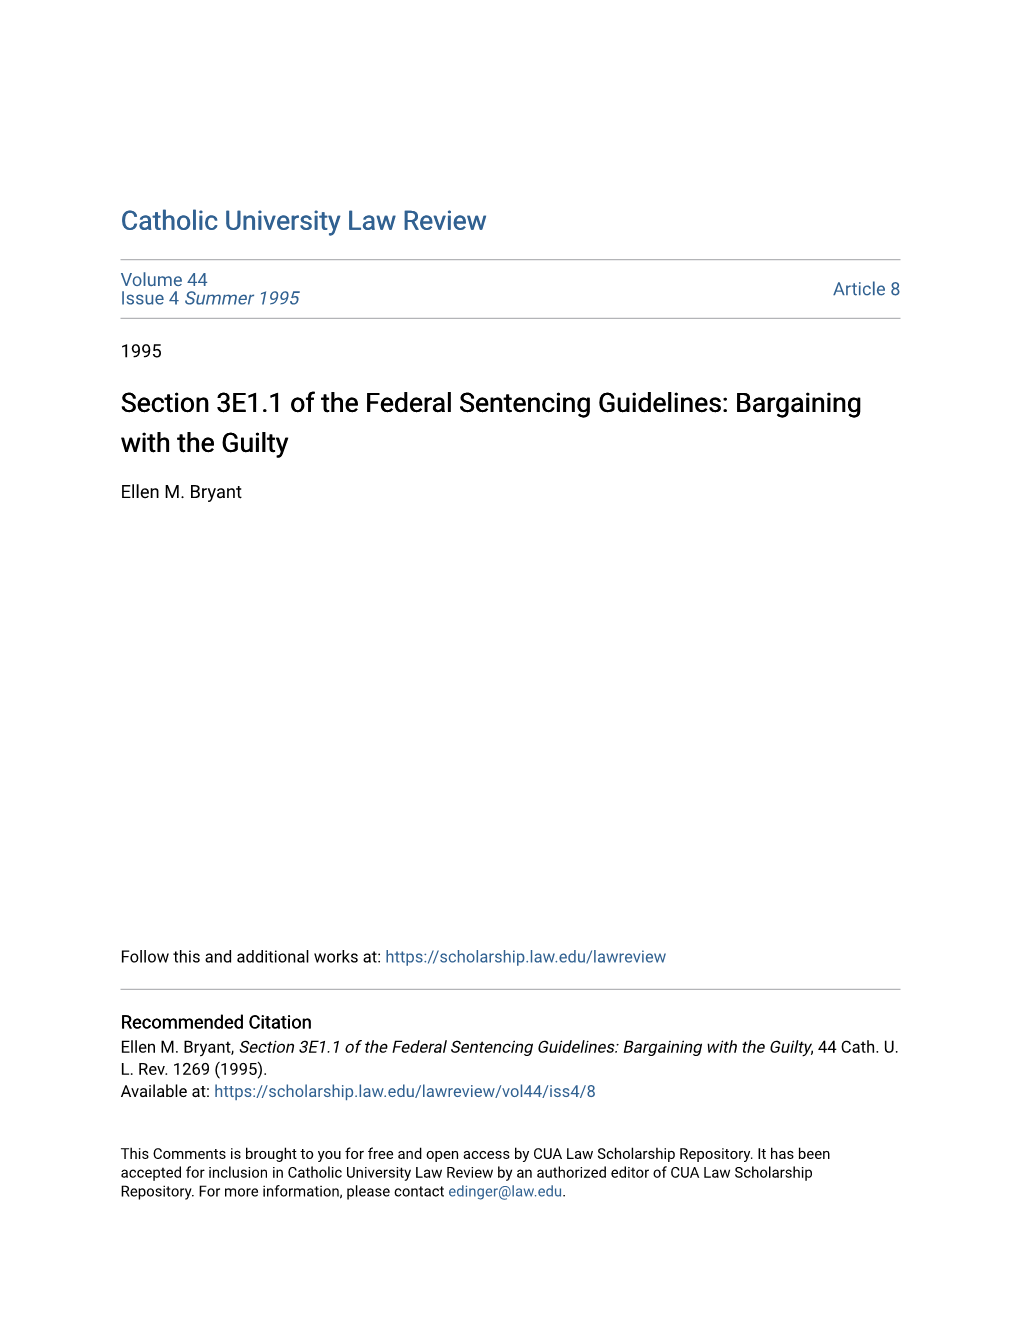 Section 3E1.1 of the Federal Sentencing Guidelines: Bargaining with the Guilty